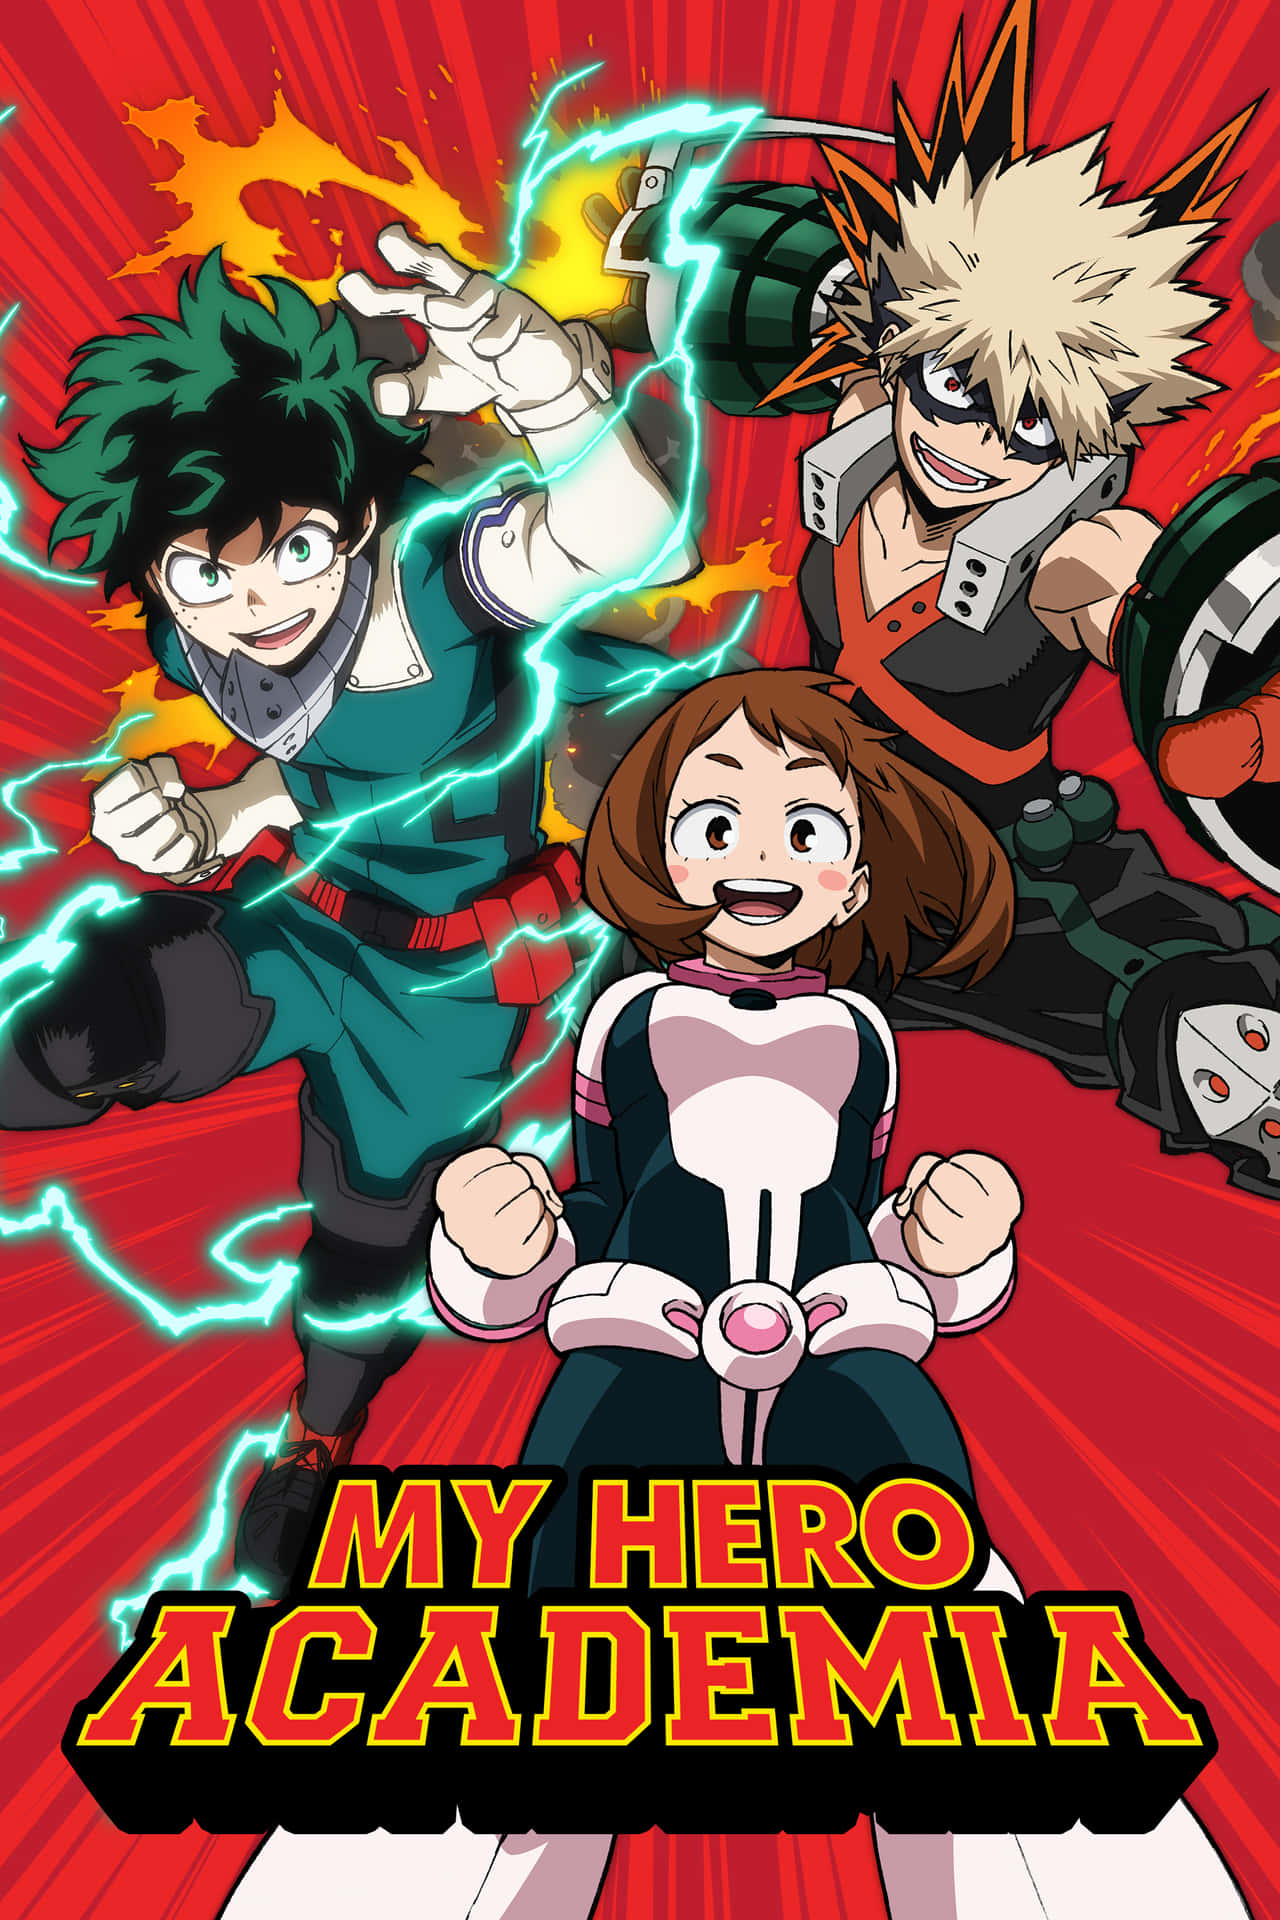 "Every Day Brings A Chance To Reach For Something Greater: The Symbol Of Hope, All Might From My Hero Academia!"